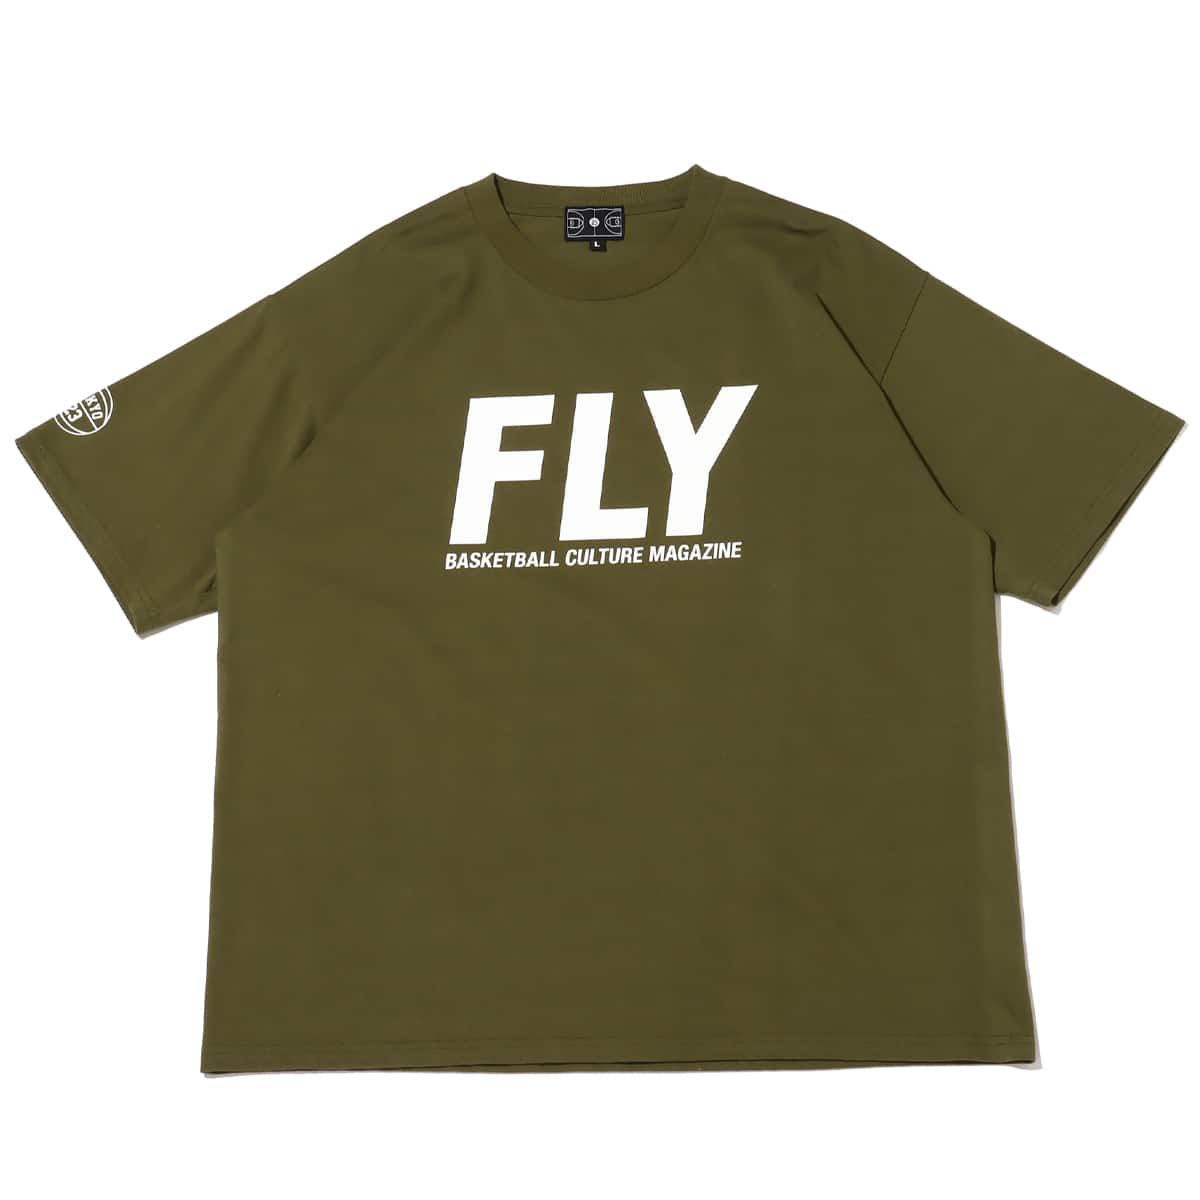 TOKYO 23 x FLY BASKETBALL CULTURE MAGAZINE TEE OLIVE 22FW-S_photo_large